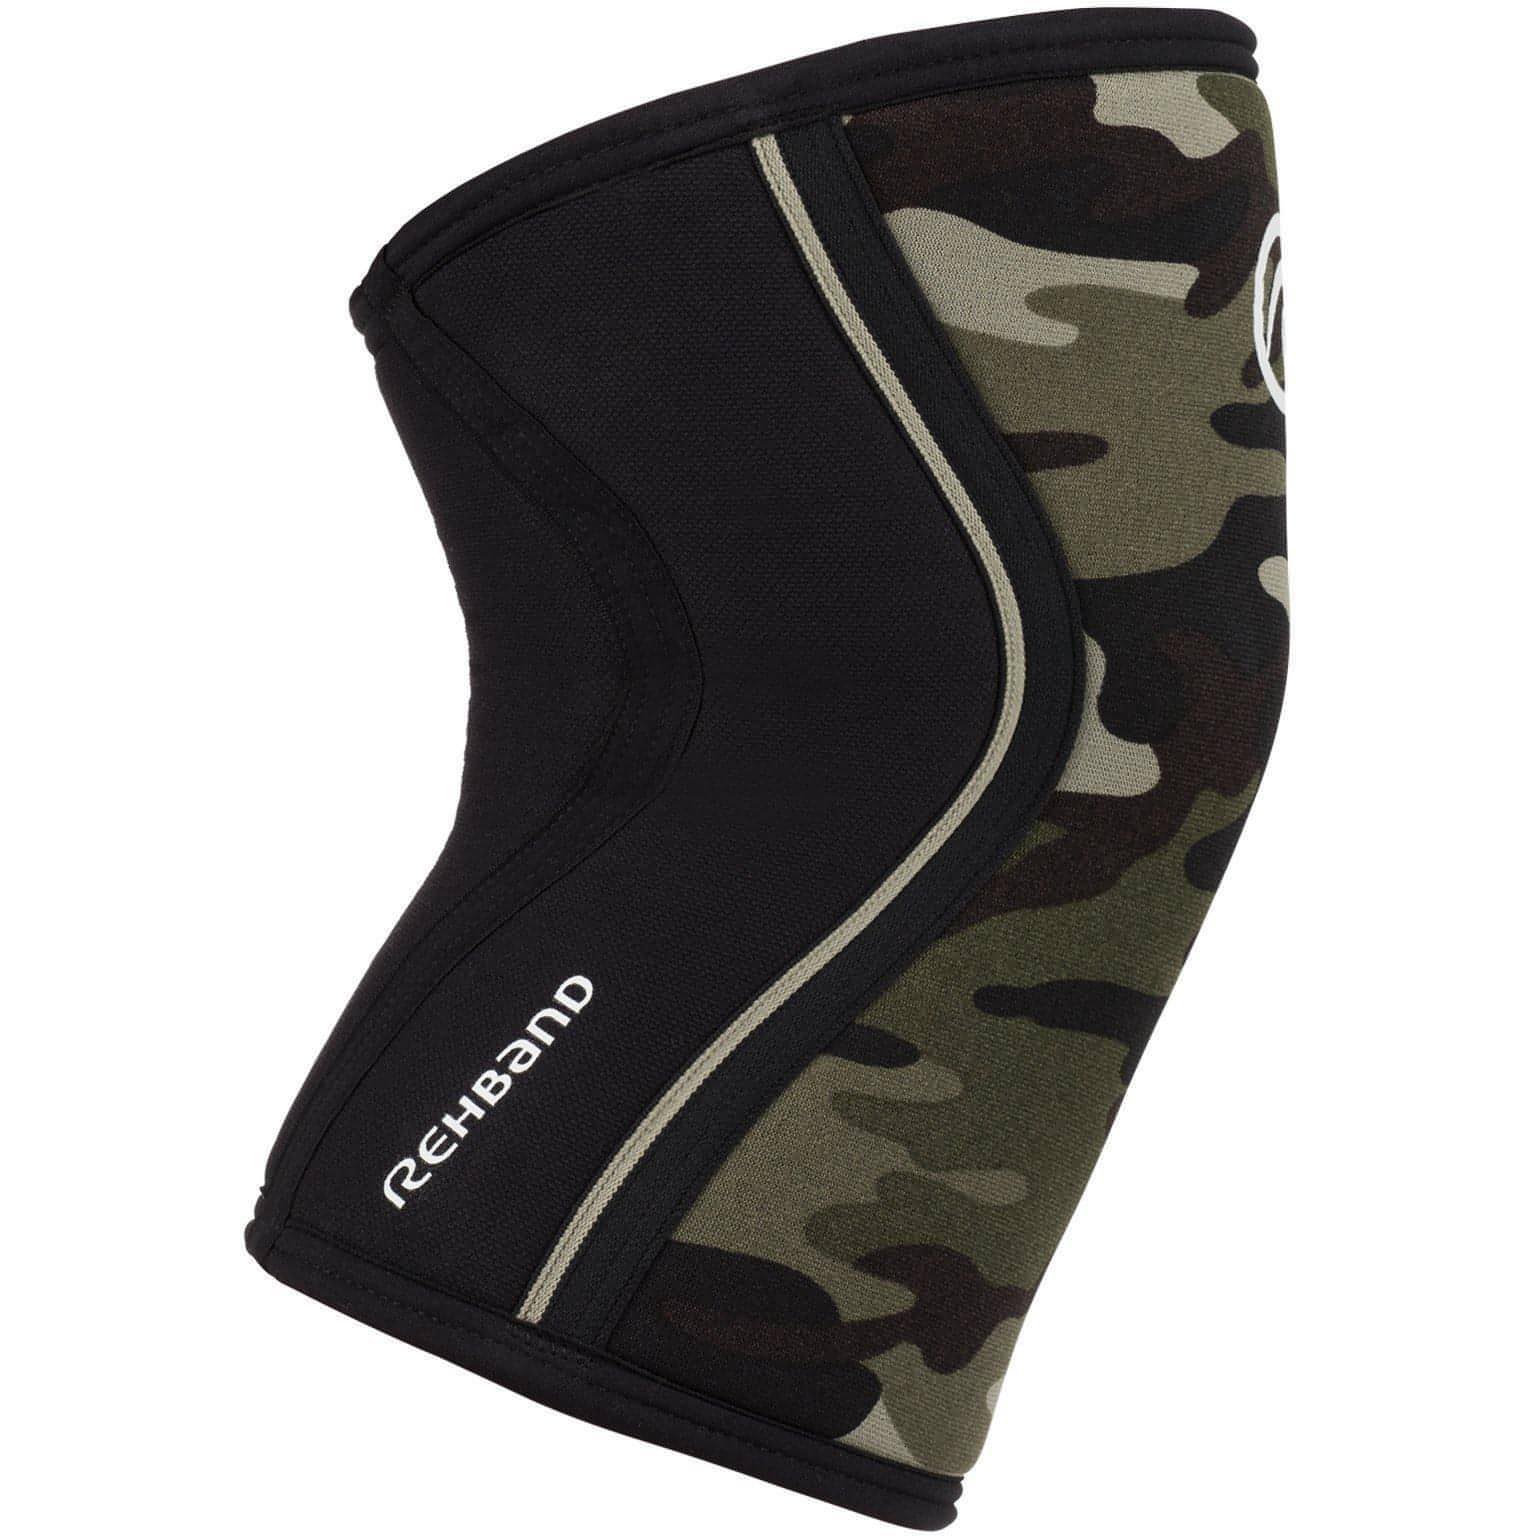 Rehband RX 7mm Knee Sleeve Support - Camo - Start Fitness